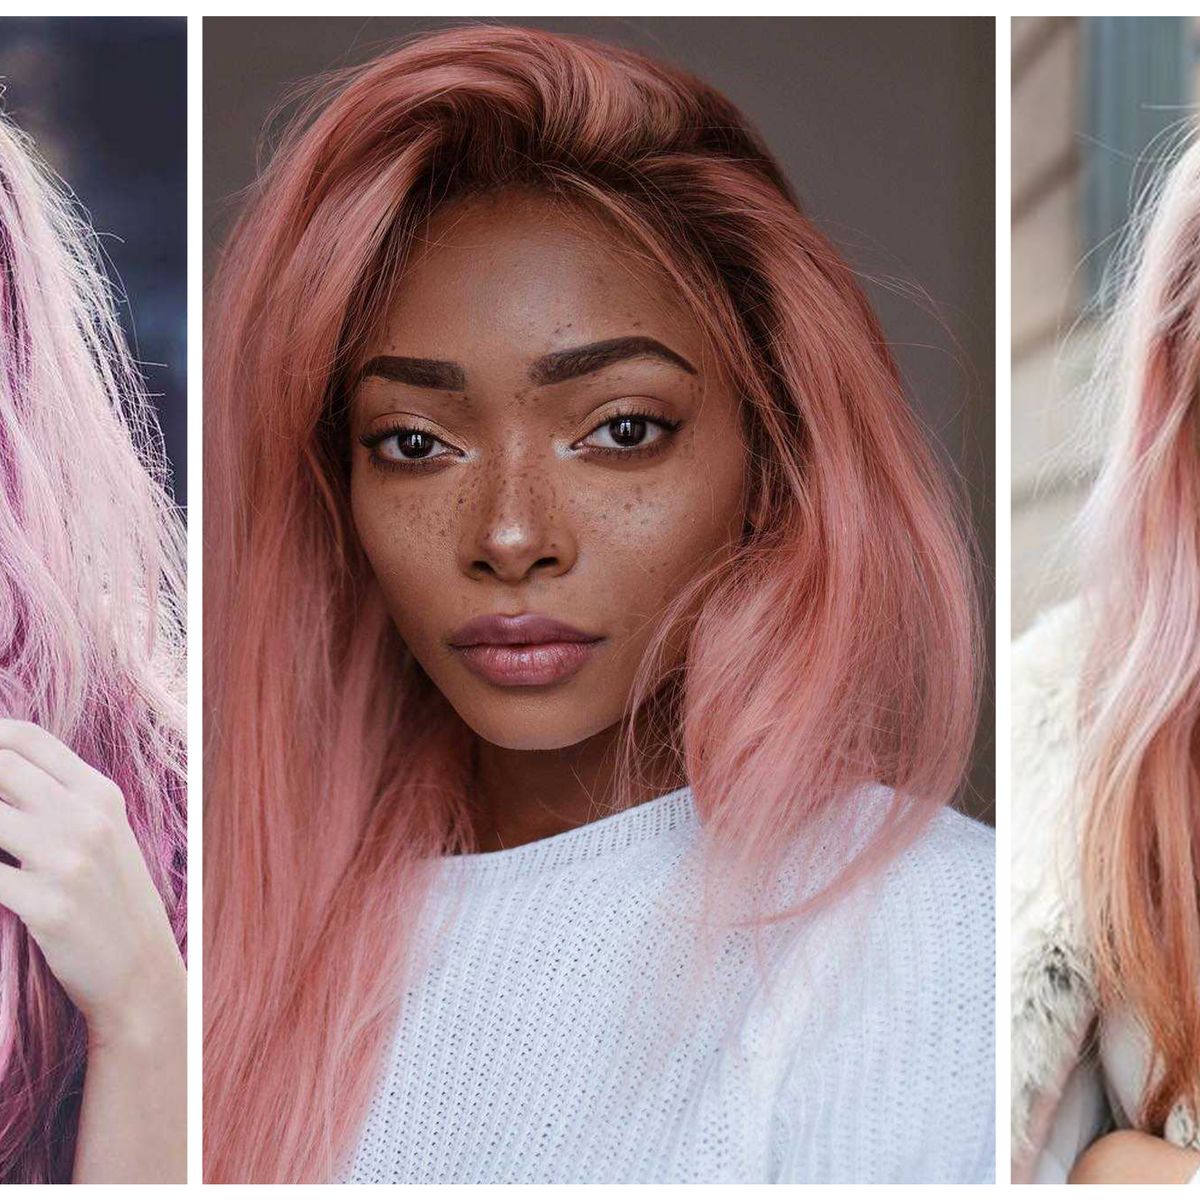 9 Grown-Ups Can Pull Off the Fun Pink Hair Pink Hair for